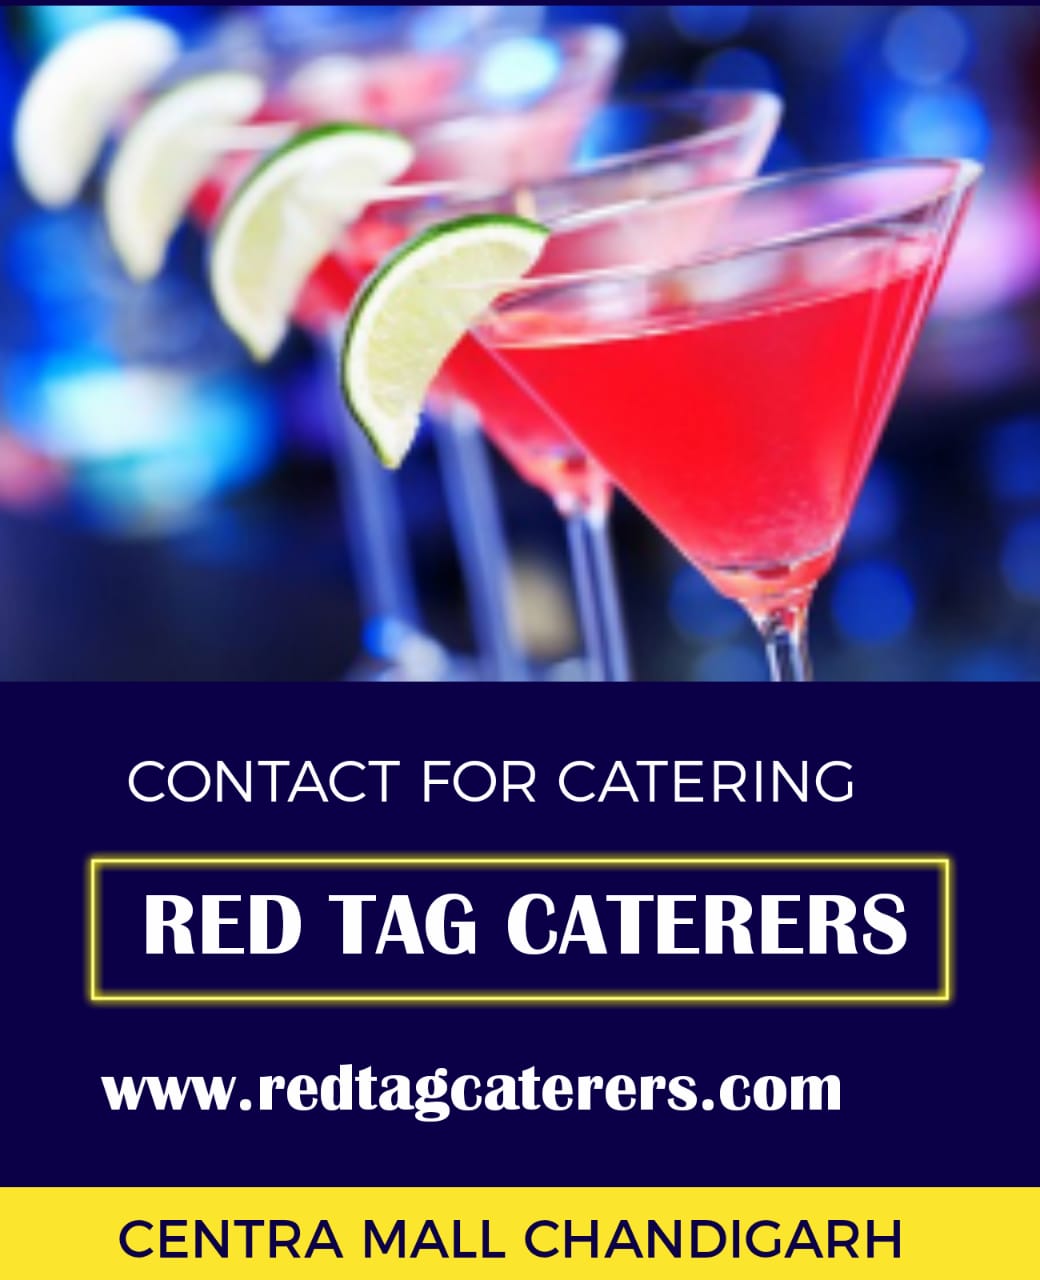 Best in all cuisines, traditional, quality, Catering services in Chandigarh | Red Tag Caterers | Best cuisine catering services in Chandigarh, traditional catering services in Chandigarh, hygienic catering services in Chandigarh, quality catering services in Chandigarh,  - GL46295